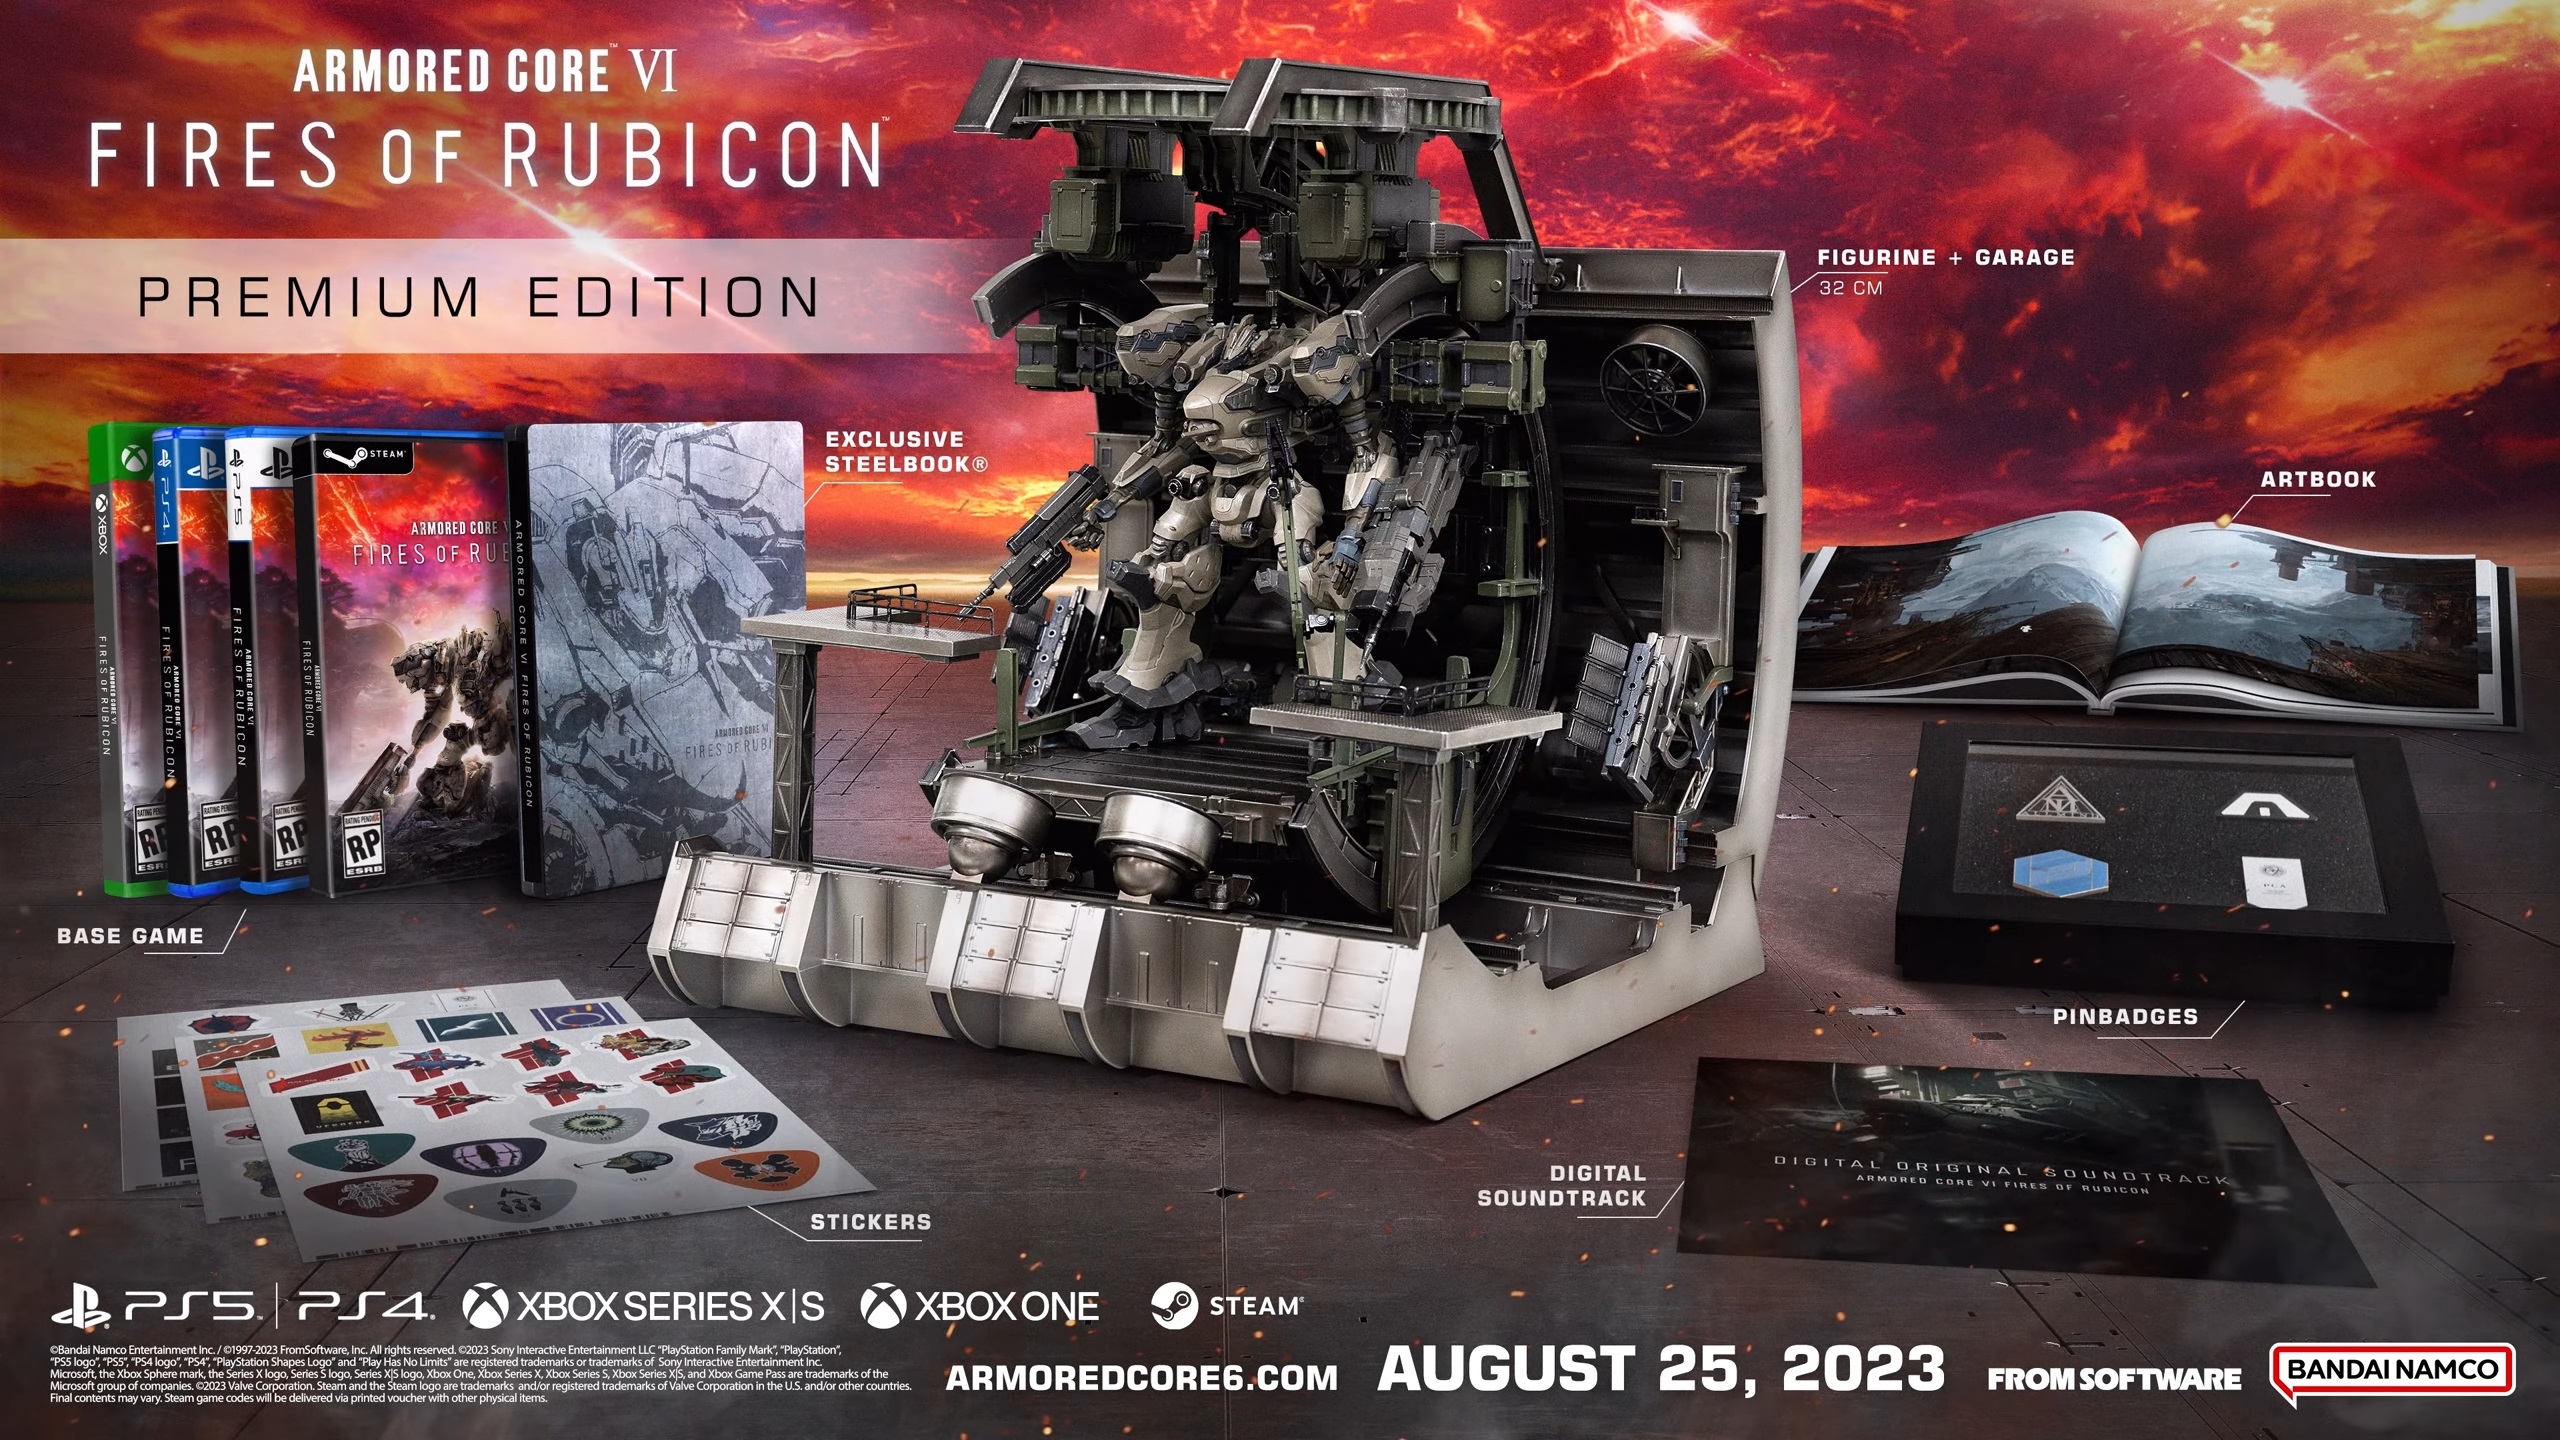 Armored Core 6 premium edition featuring a giant mecha statue inside a garage